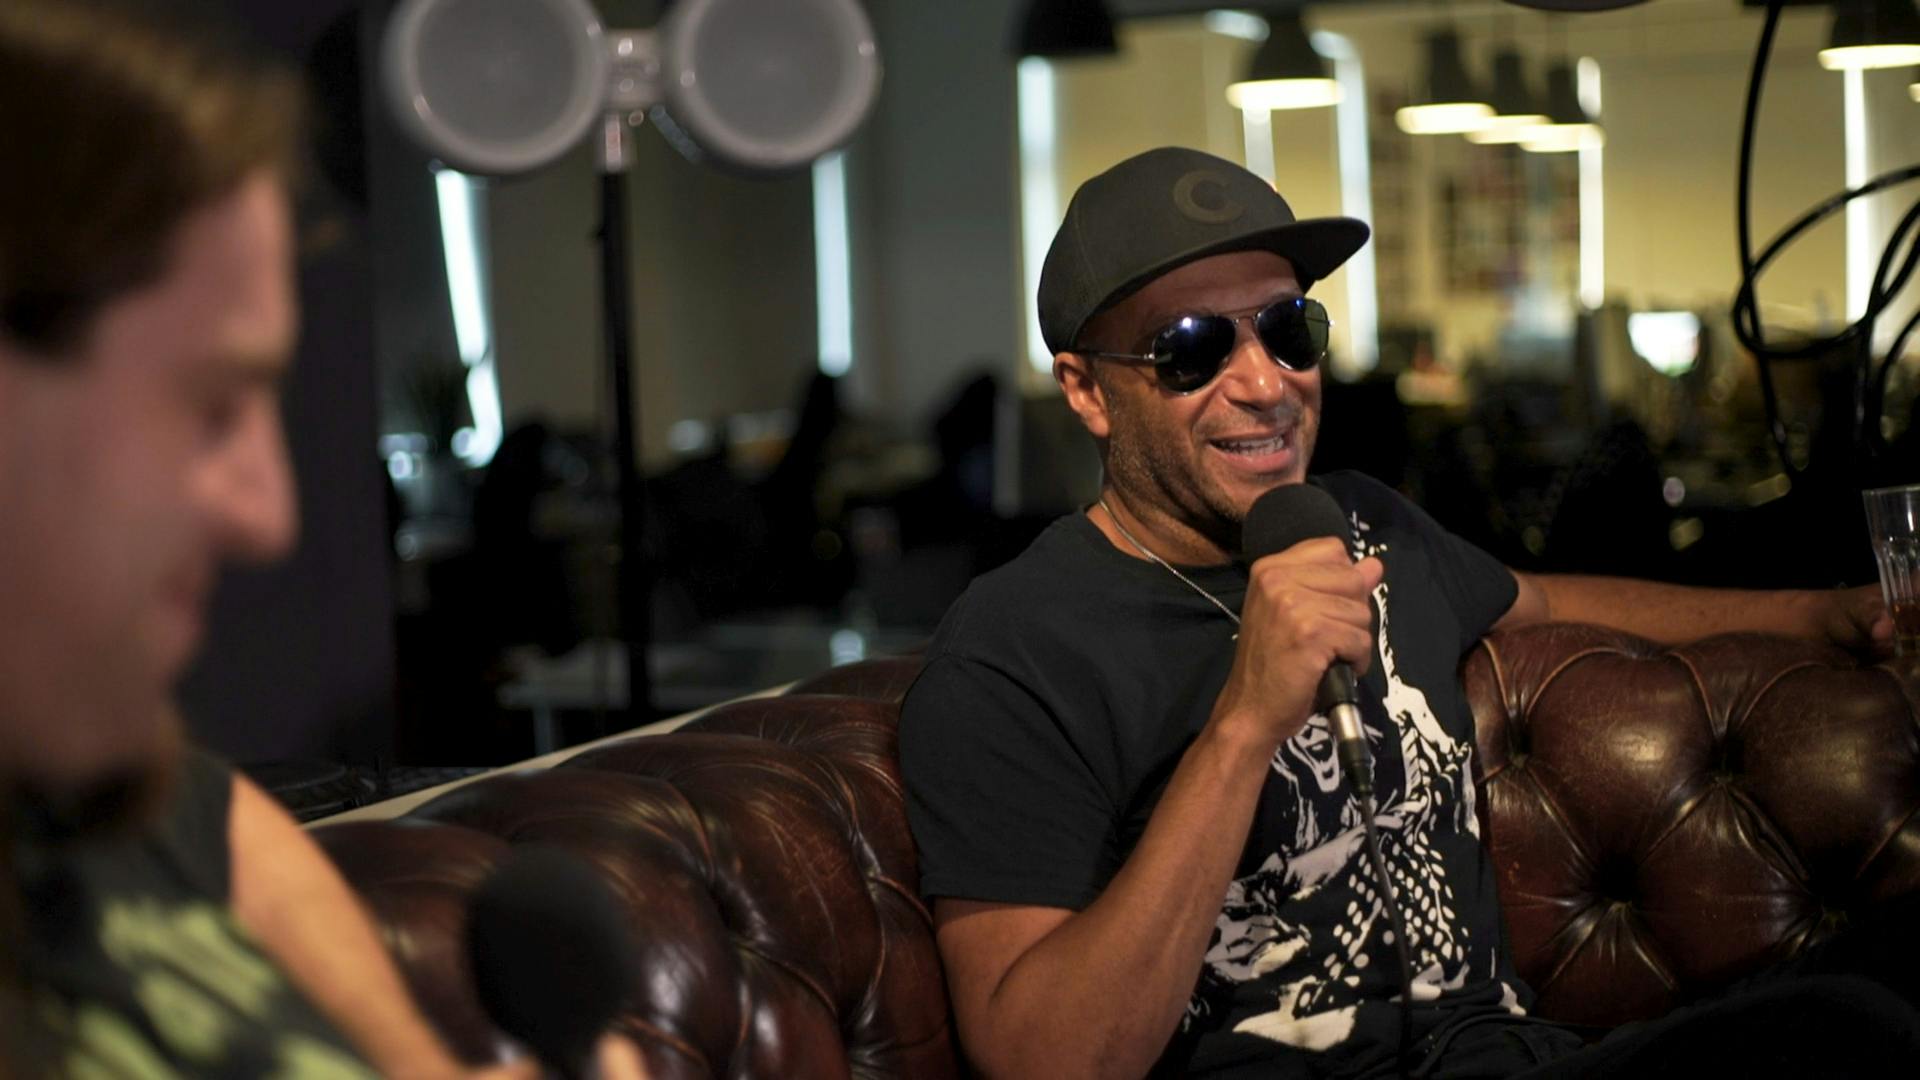 Watch Kerrang!'s Brand-New In Conversation With Tom Morello Video